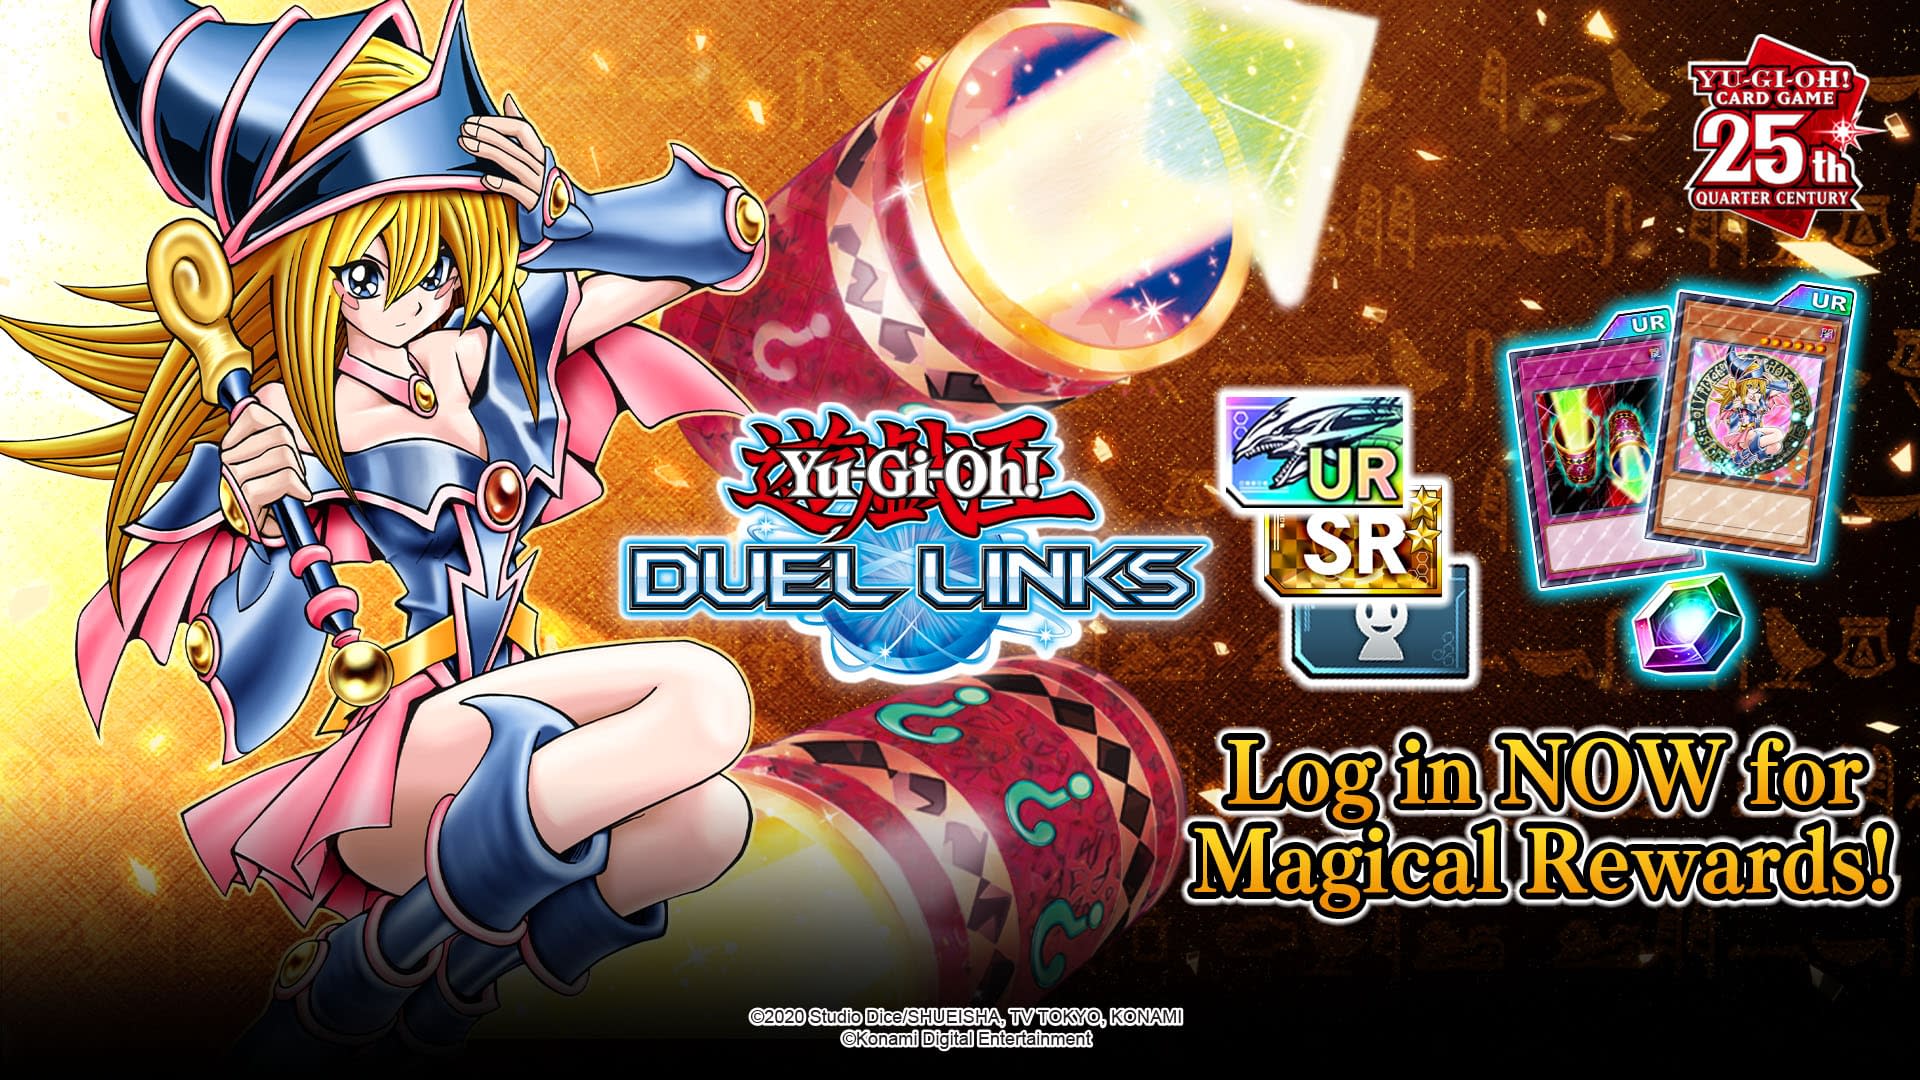 Yu-Gi-Oh Duel Links celebrates its 25th anniversary of the Yu-Gi-Oh card game with popular cards!